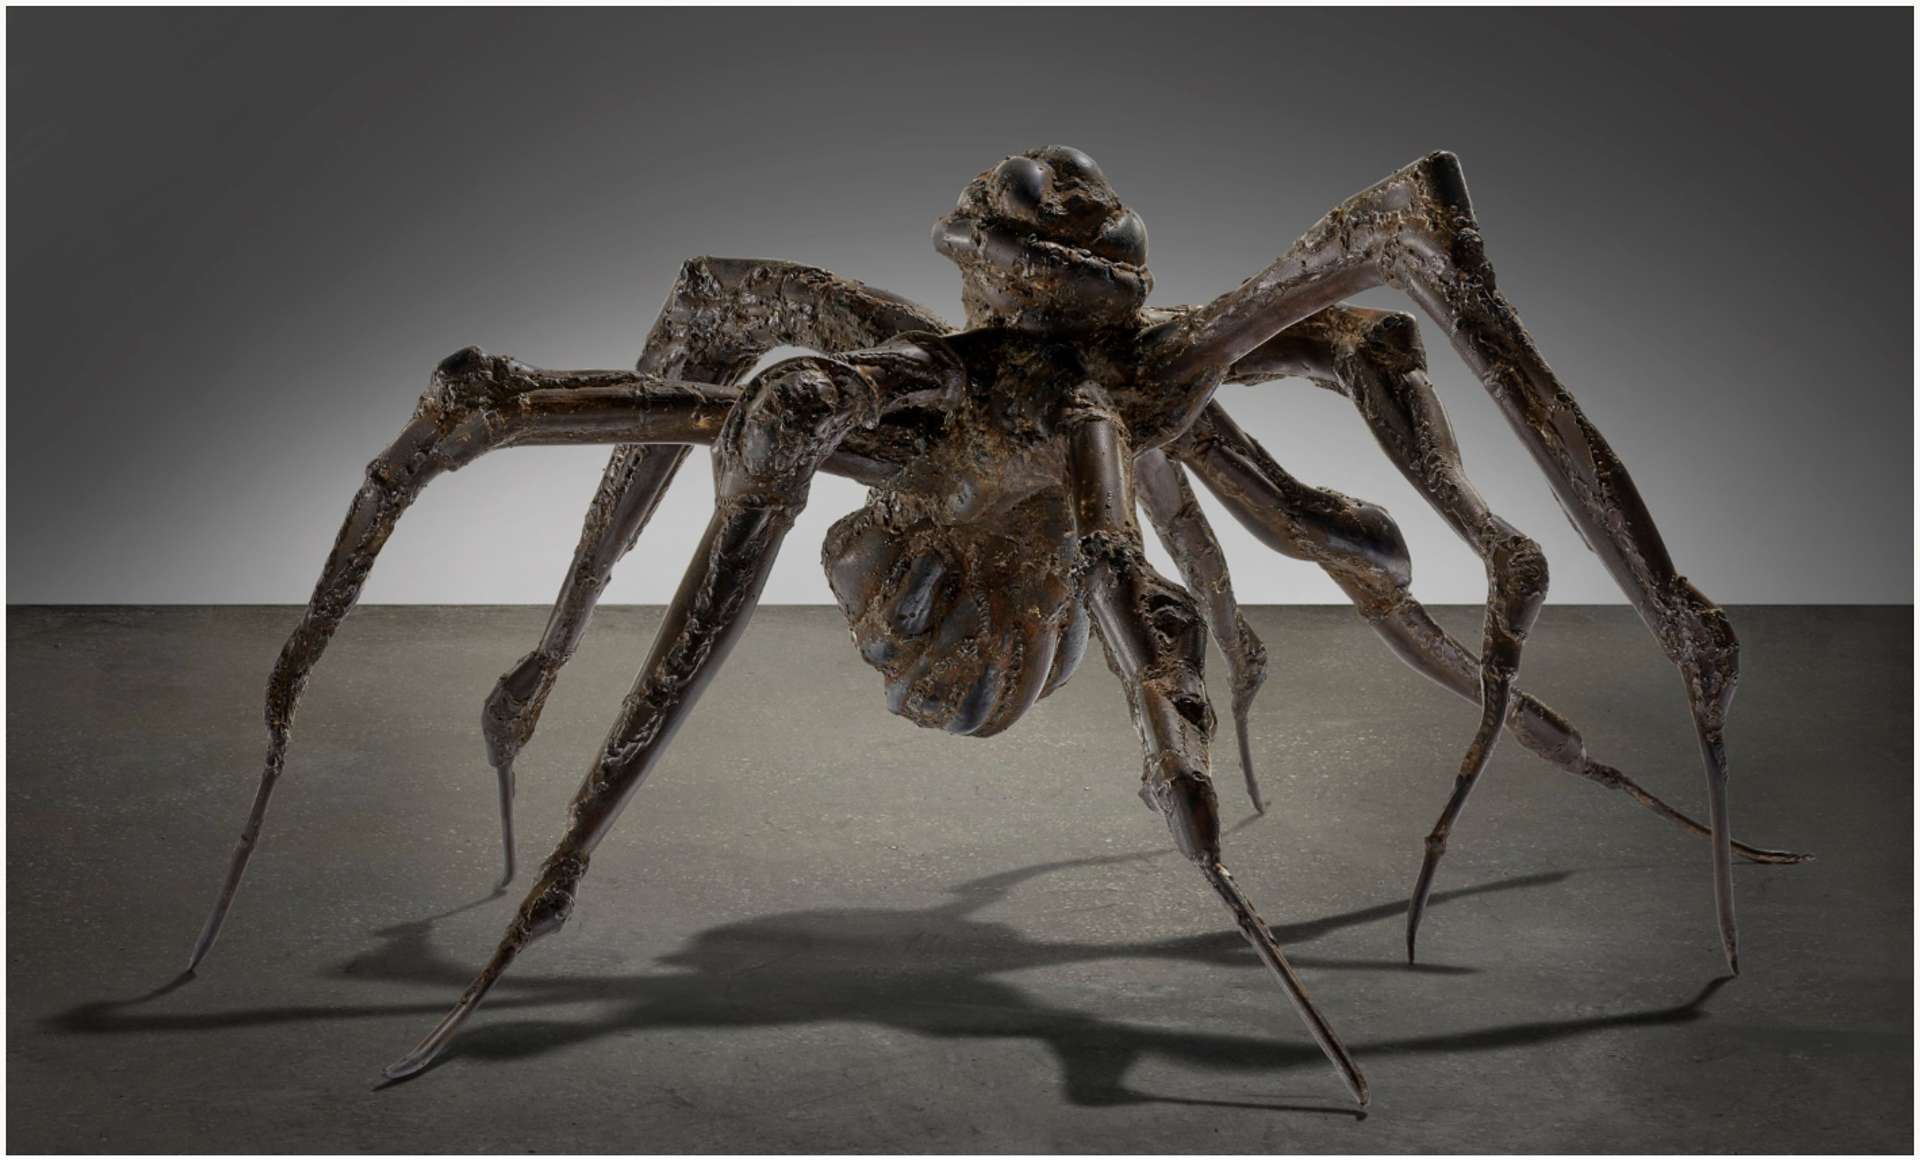 A steel spider sculpture displayed on the ground, featuring a thick body and legs that gradually taper to thin tips. The sculpture exudes a sense of weightlessness, with its body shifting upwards as if in a gaze.